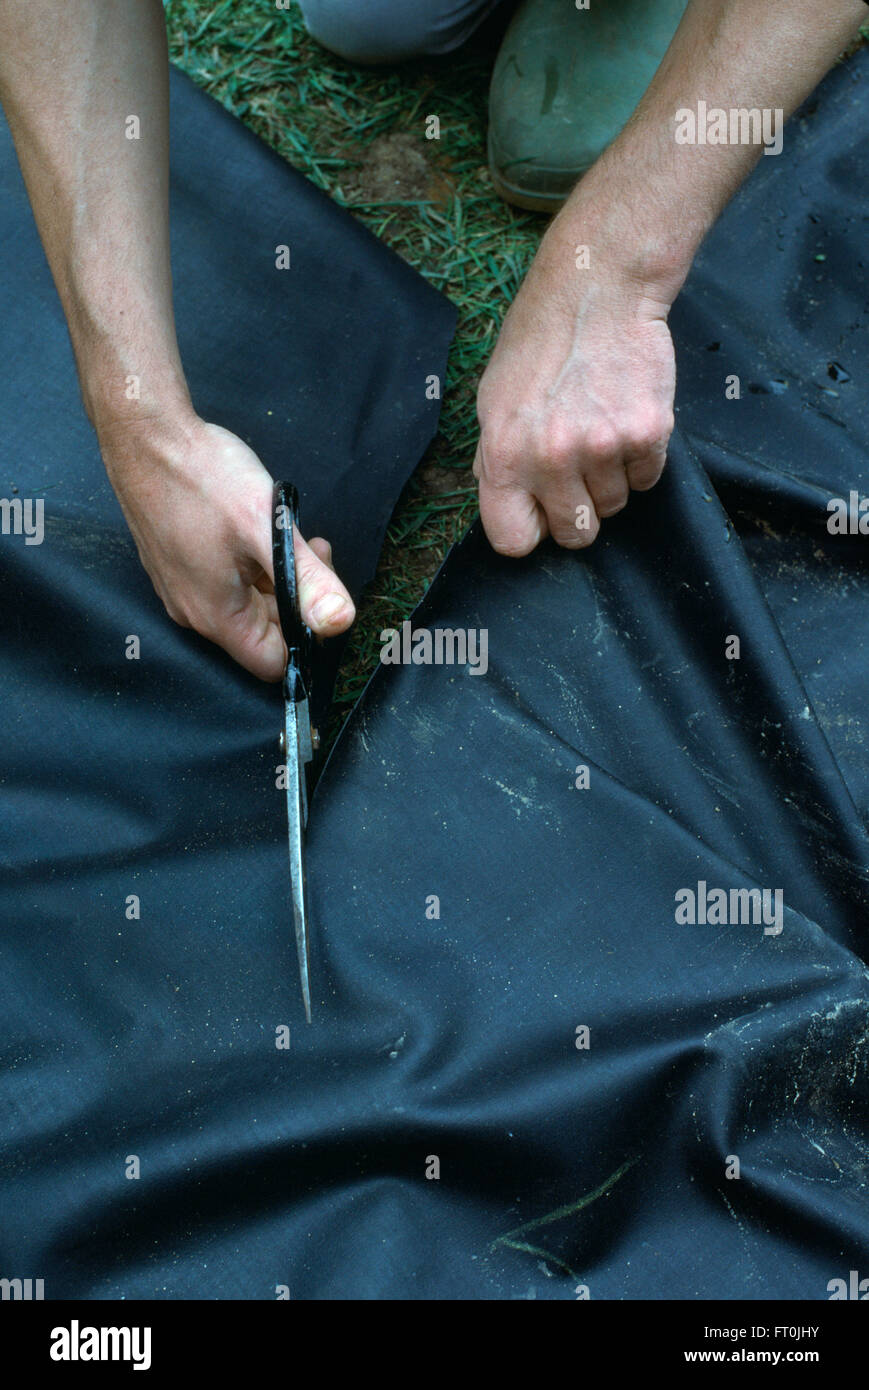 Close-up of hands cutting to size a black plastic pond liner Stock Photo